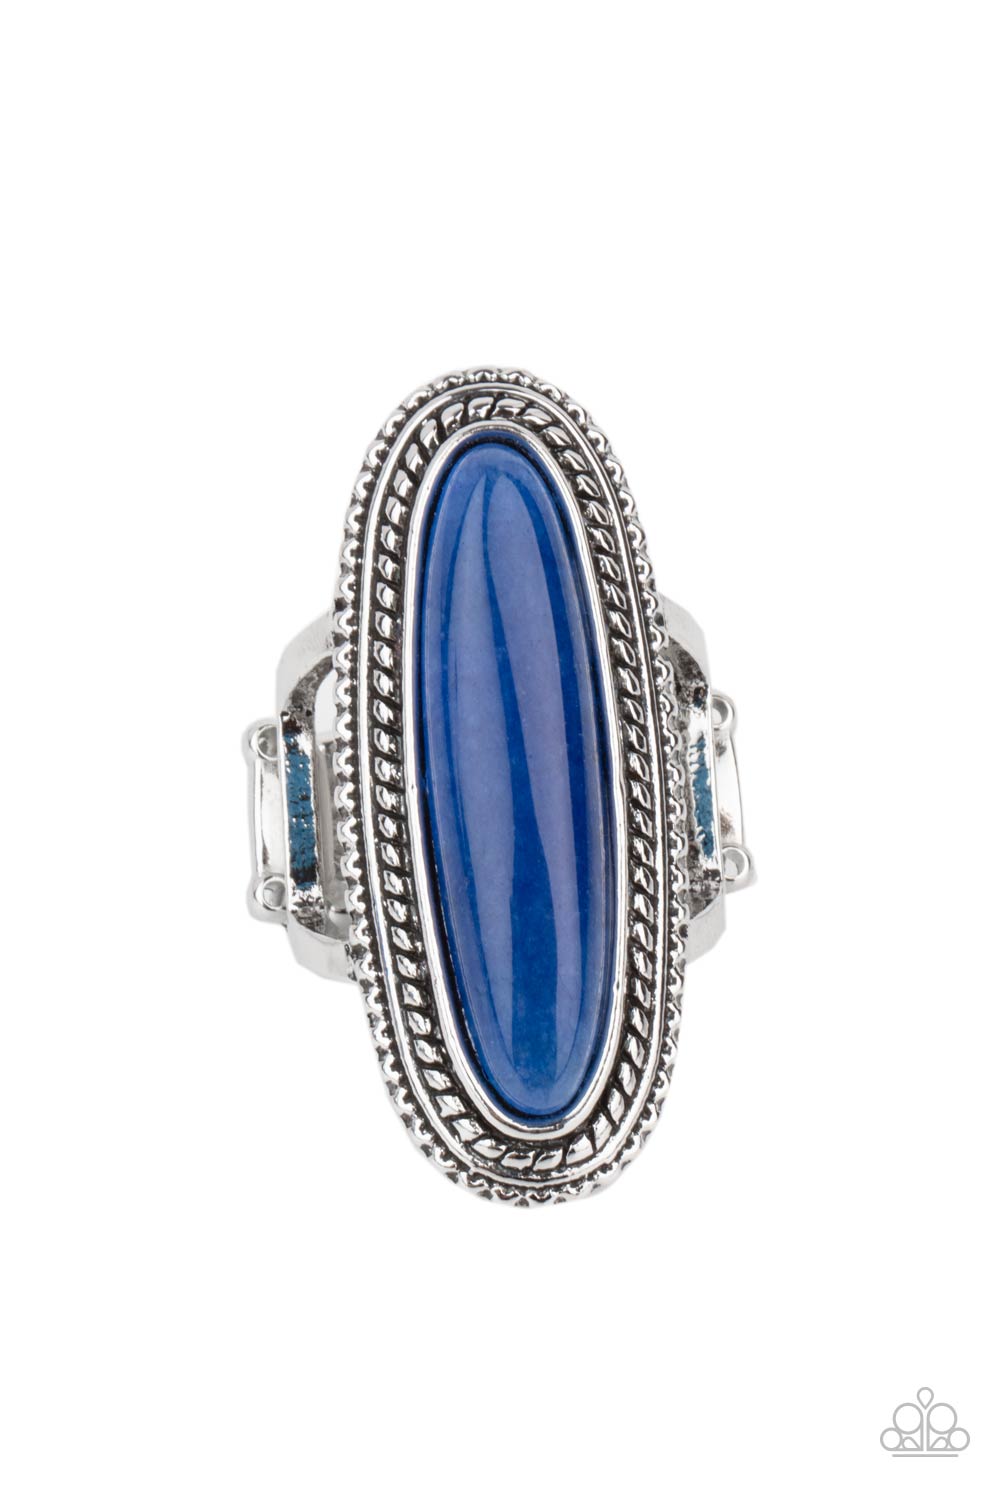 Stone Healer Blue Stone Ring - Paparazzi Accessories- lightbox - CarasShop.com - $5 Jewelry by Cara Jewels